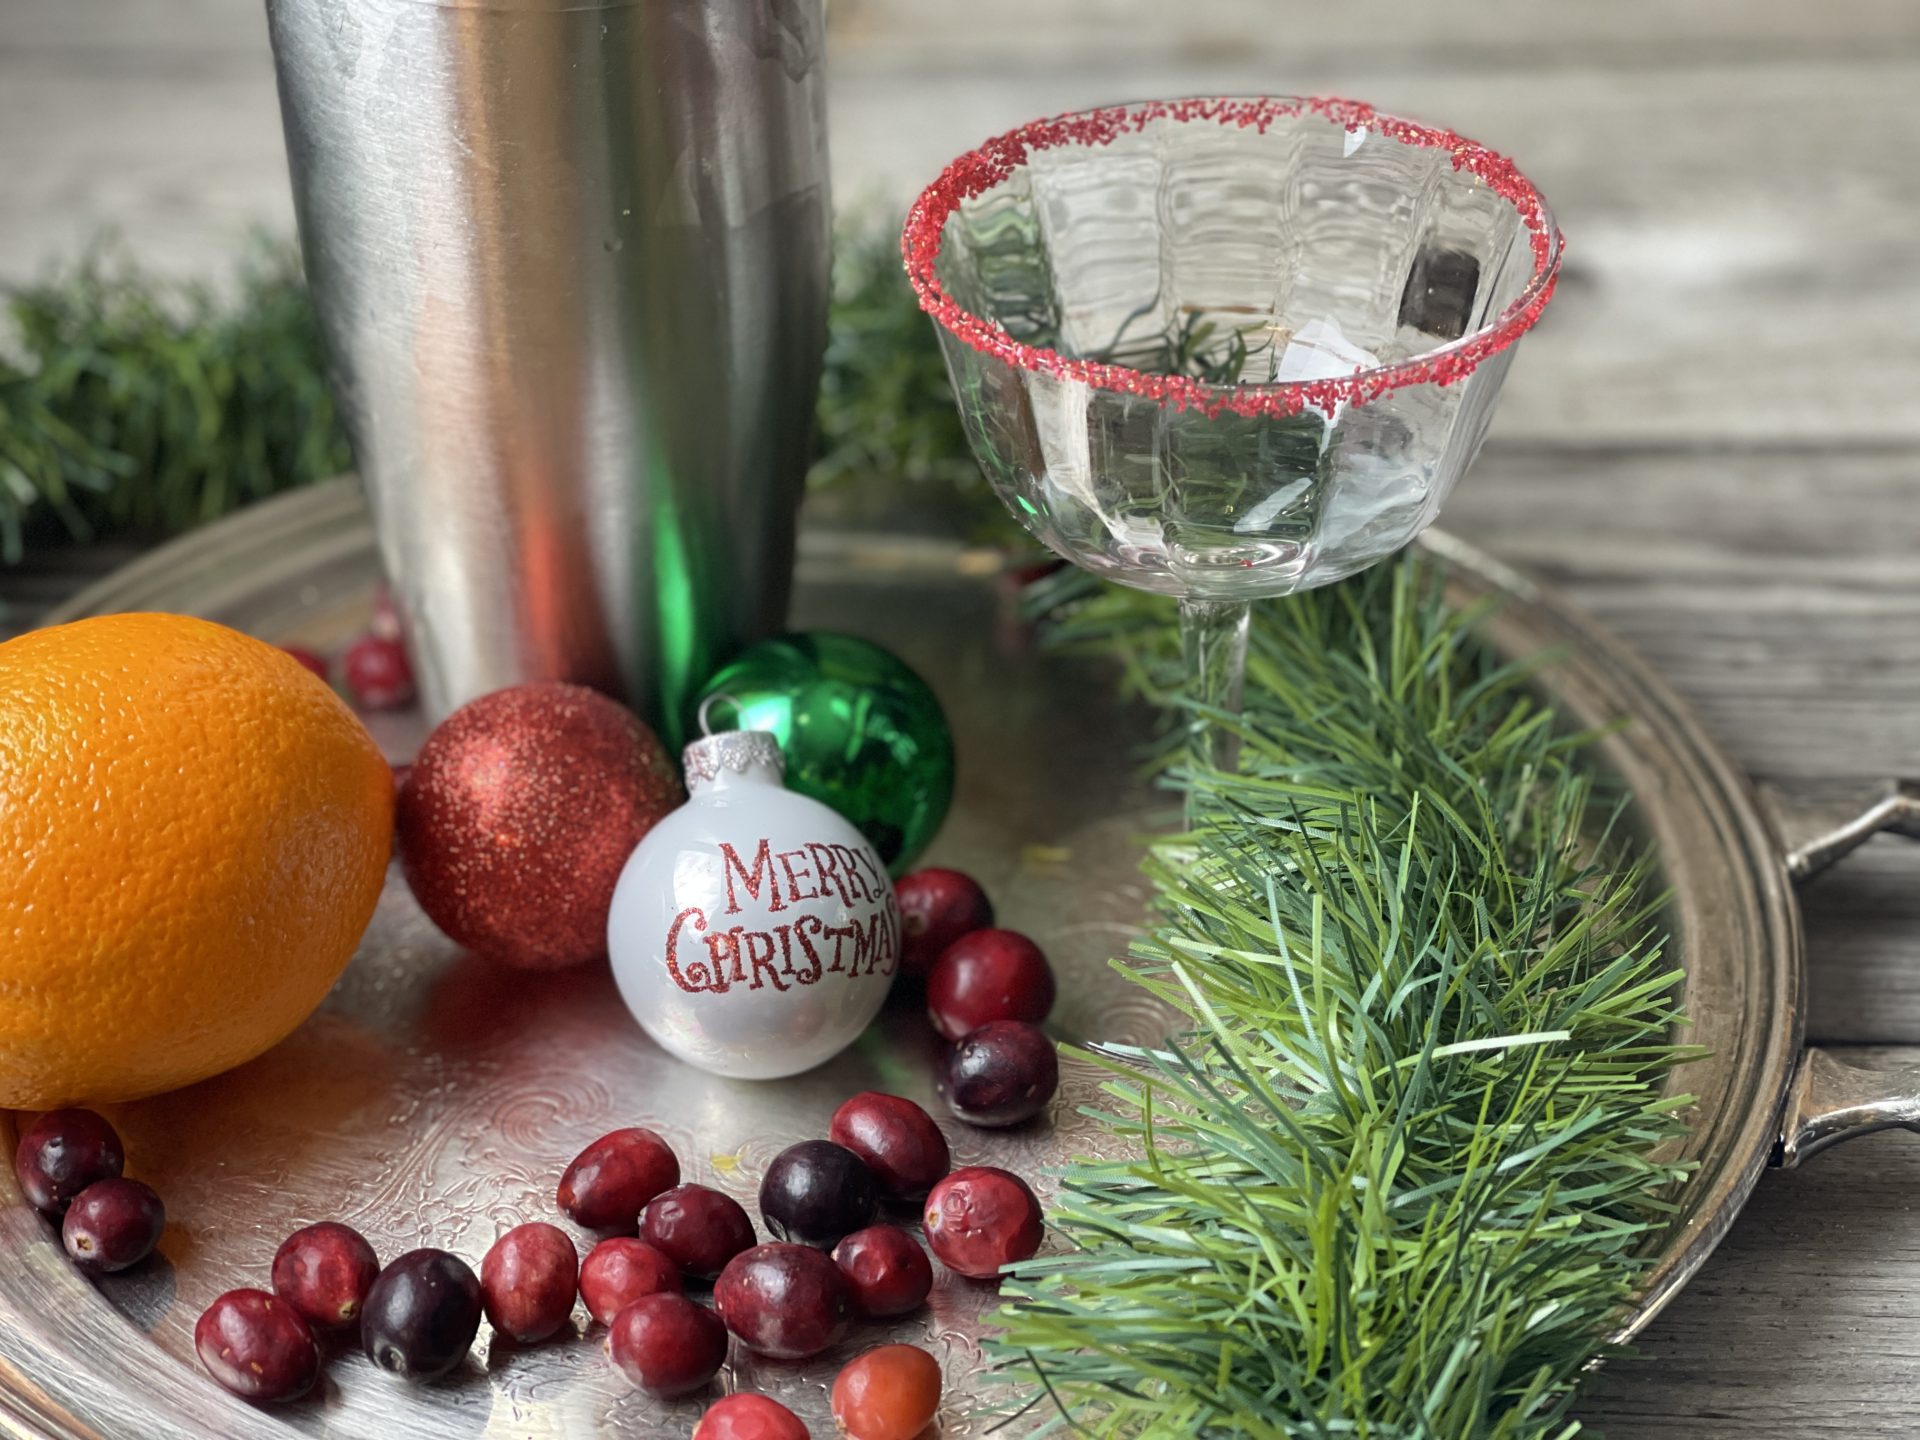 Cranberry Christmas Martini from Farmwife Feeds, 3 ingredients in a 1:1:1 ratio that is perfect for one cocktail a double or make in a punch bowl for that holiday party. #christmasdrinks #cranberry #party #martini